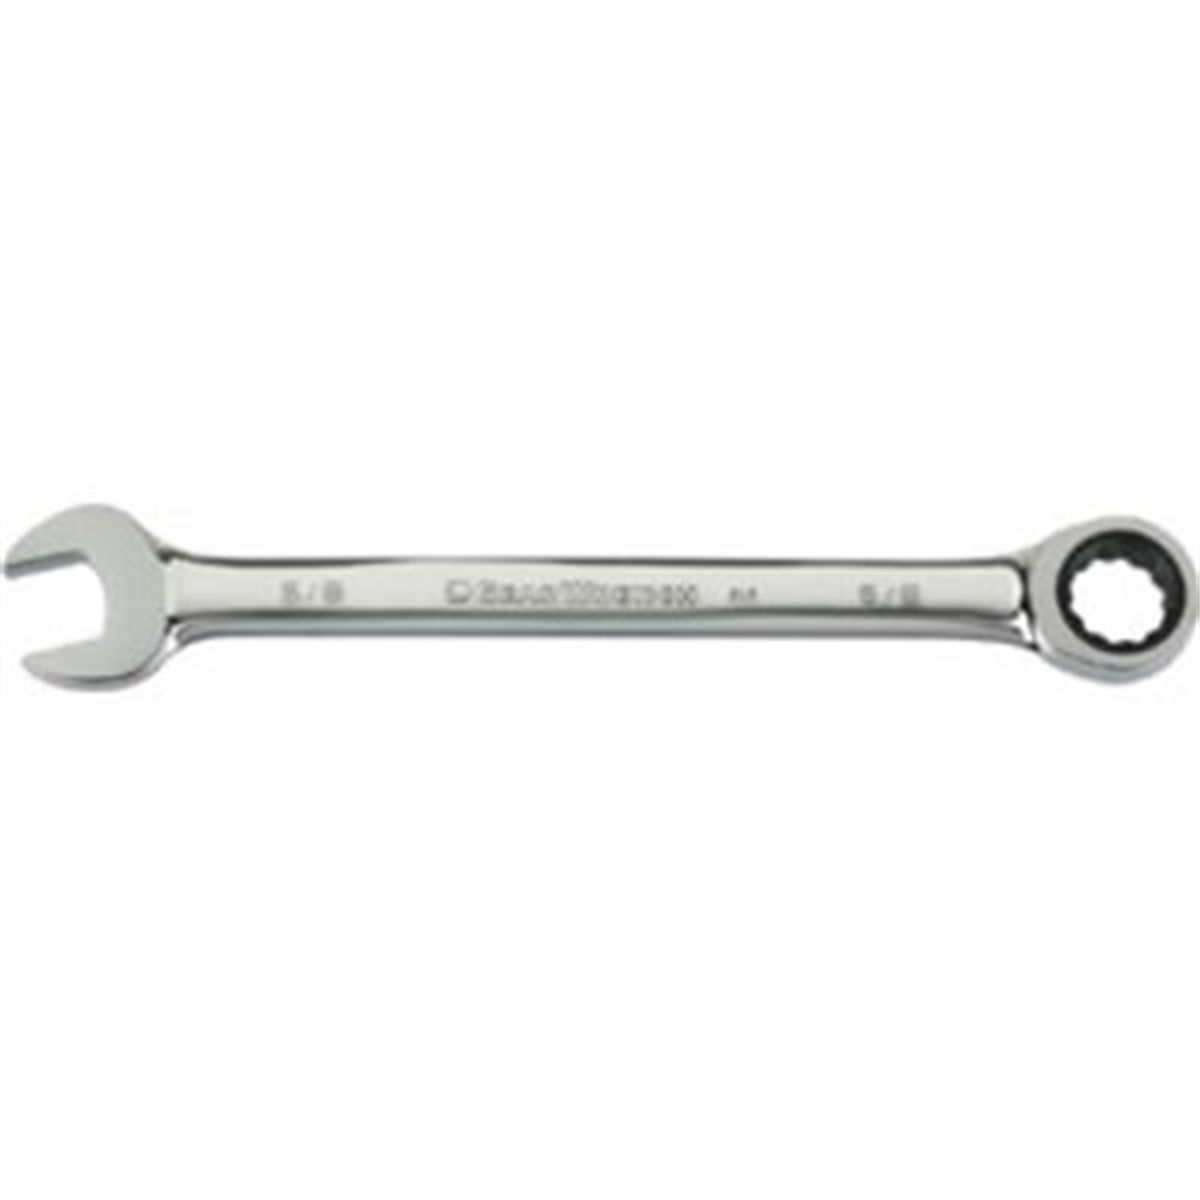 10mm Ratcheting Combination Wrench 